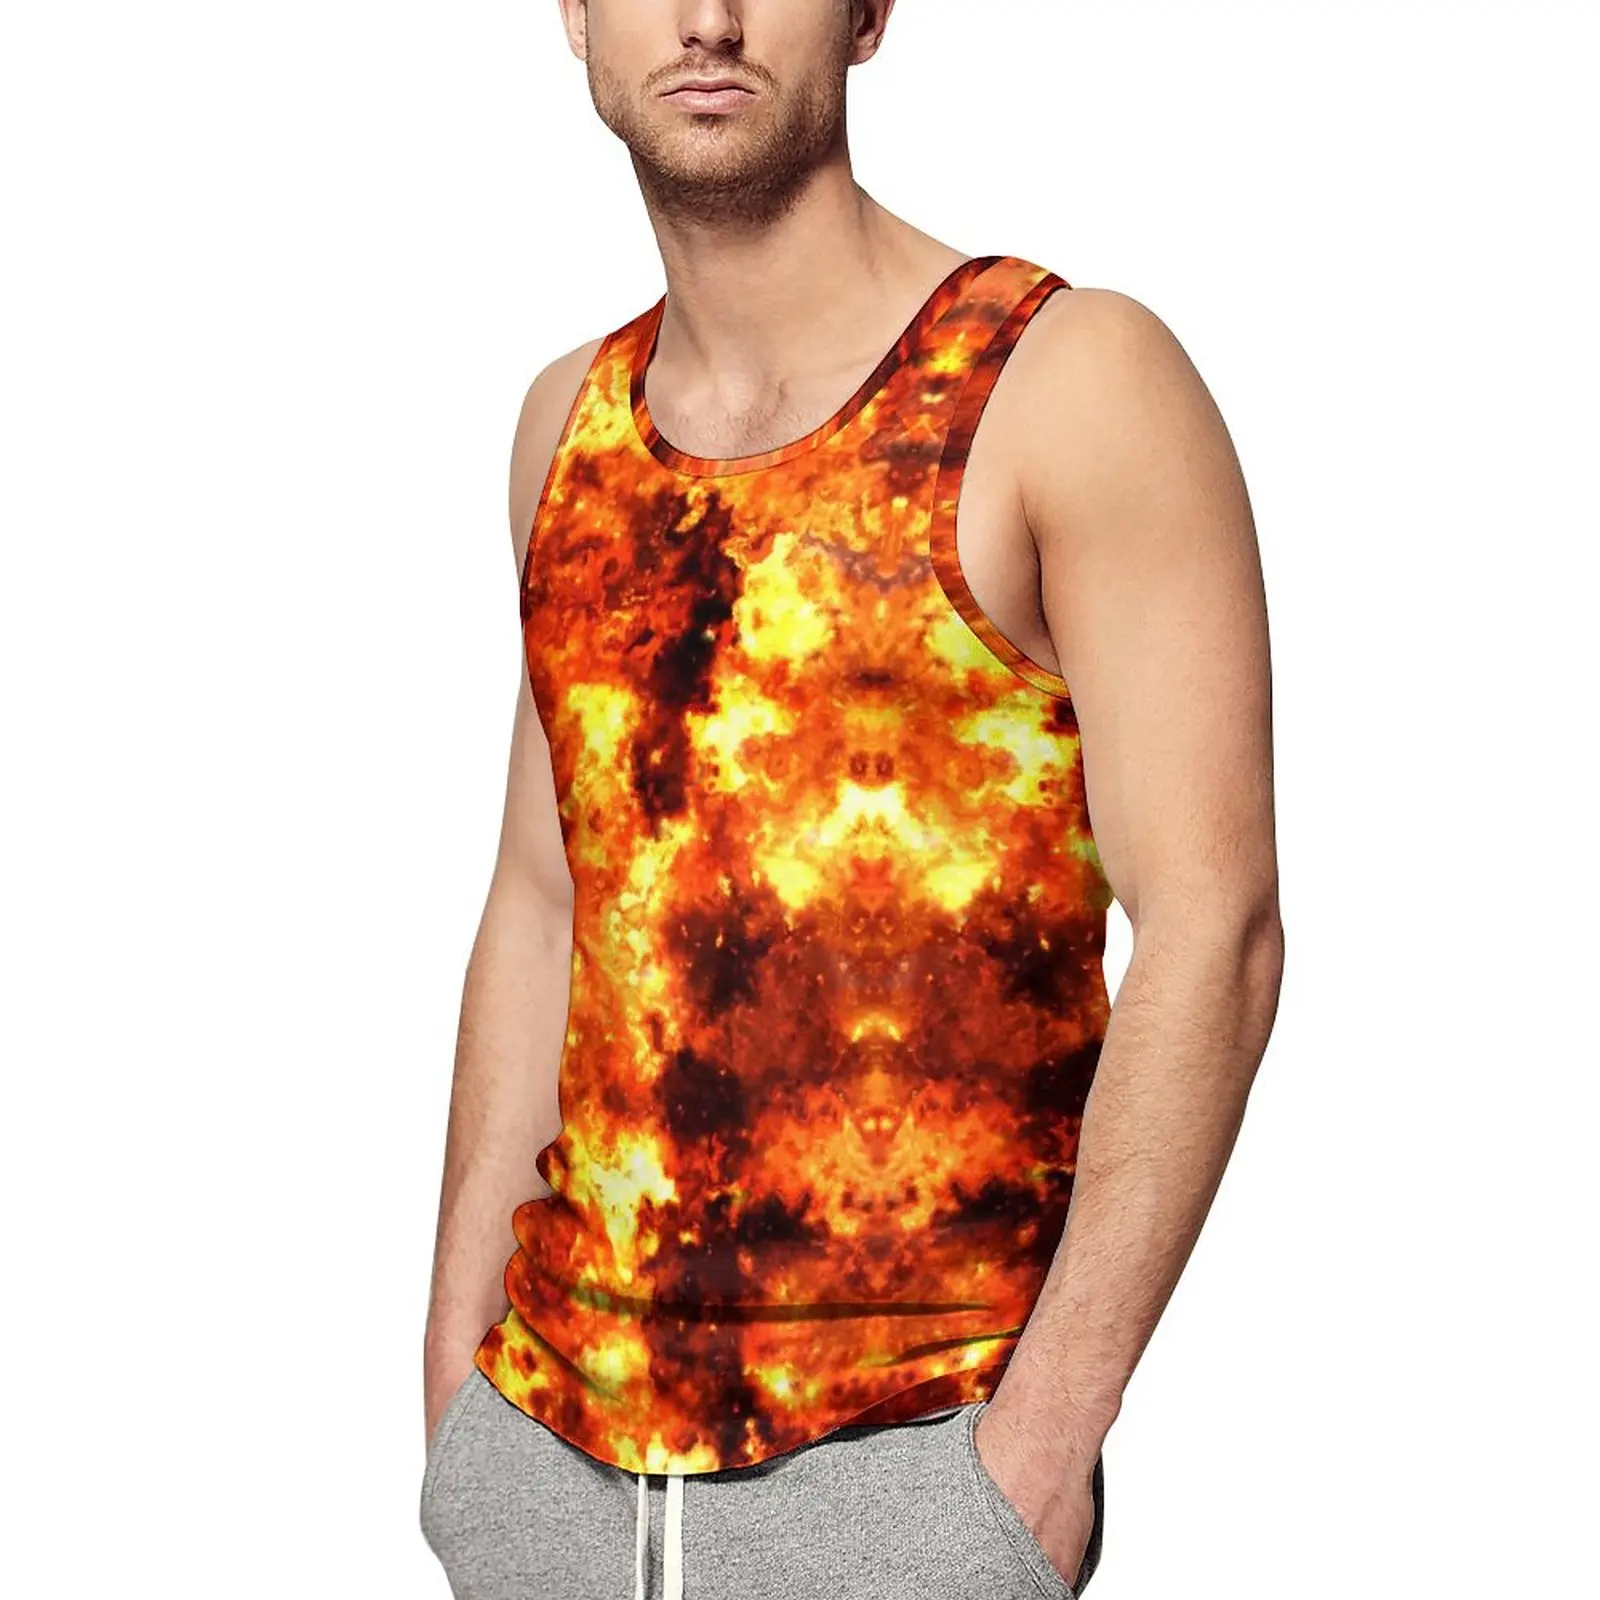 

Red Hot Fire Tank Top Males Abstract Print Tops Summer Pattern Gym Muscle Oversized Sleeveless Vests